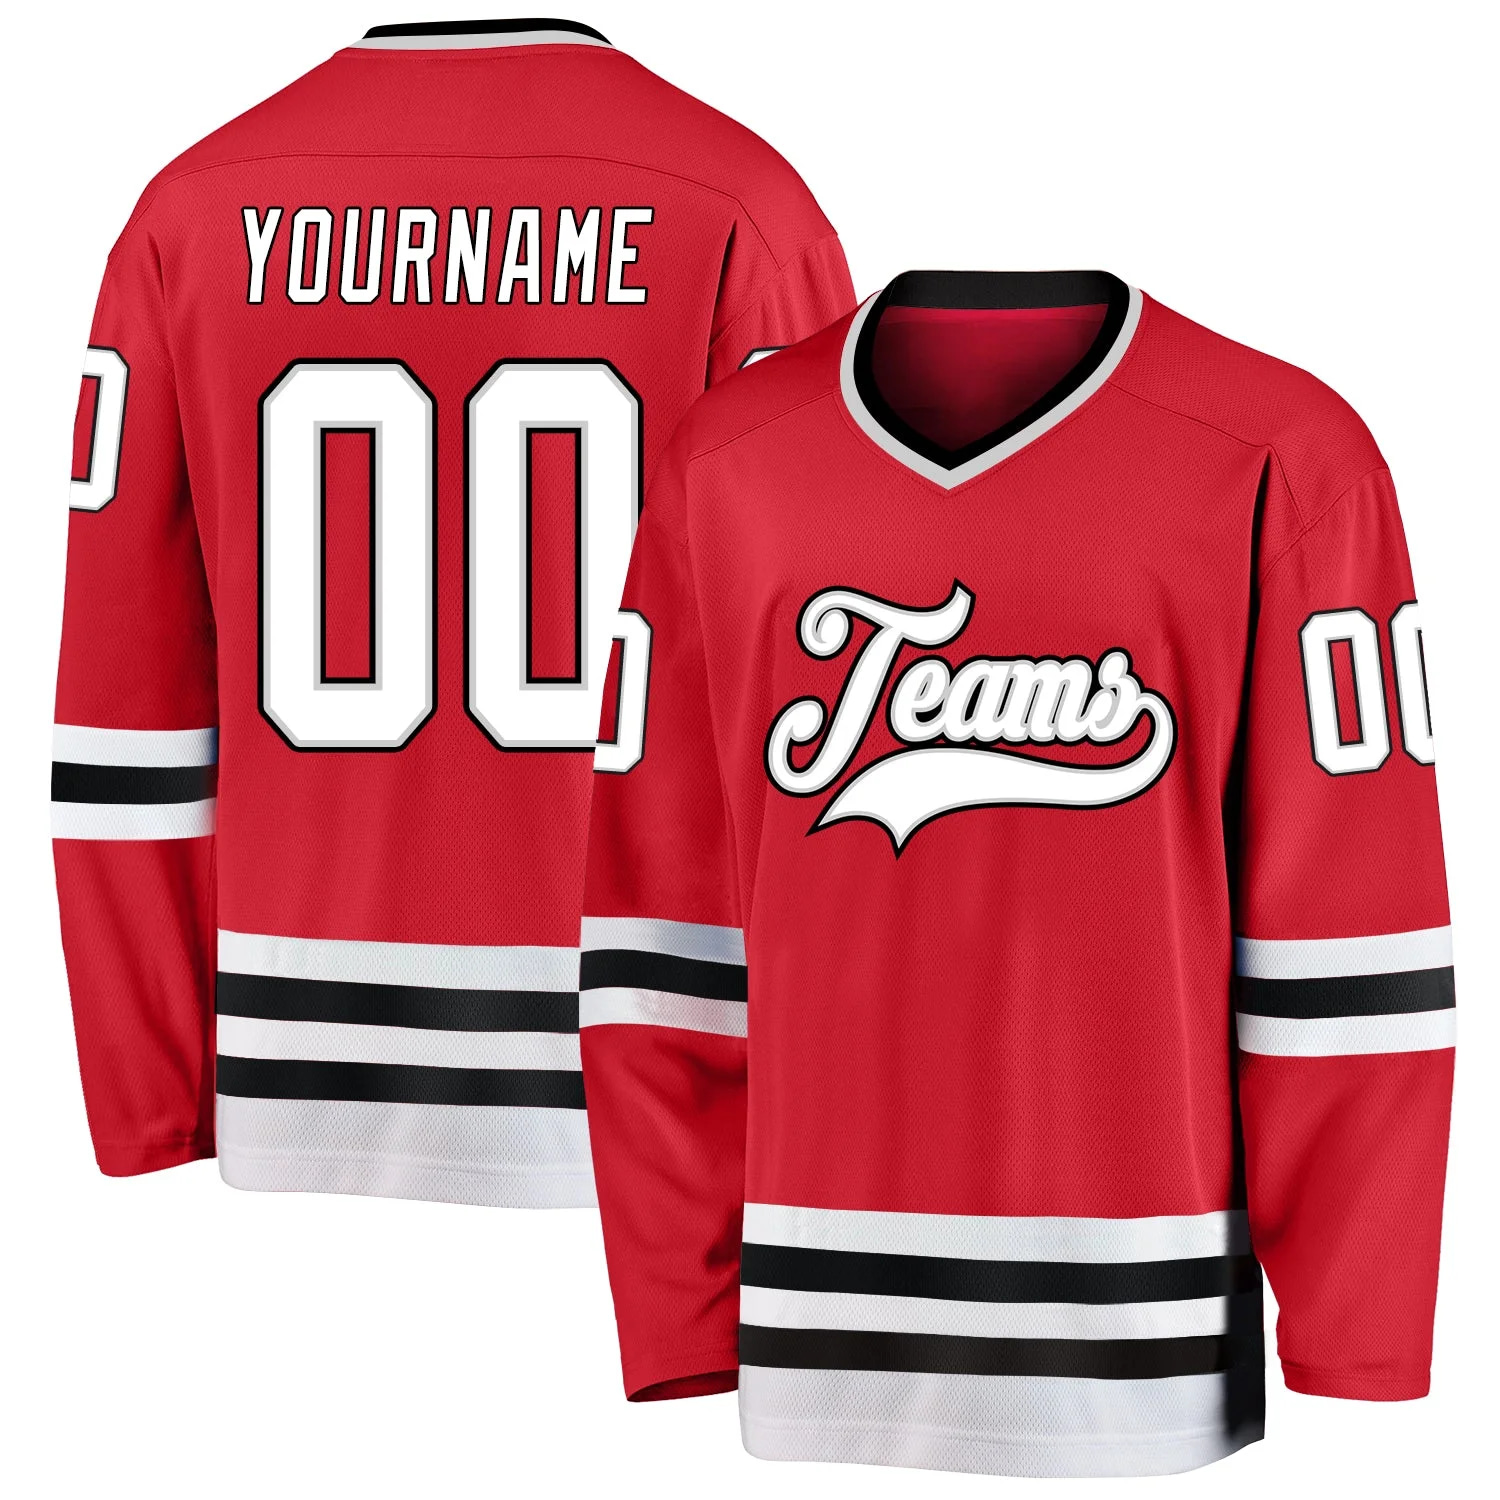 Stitched And Print Red White-gray Hockey Jersey Custom